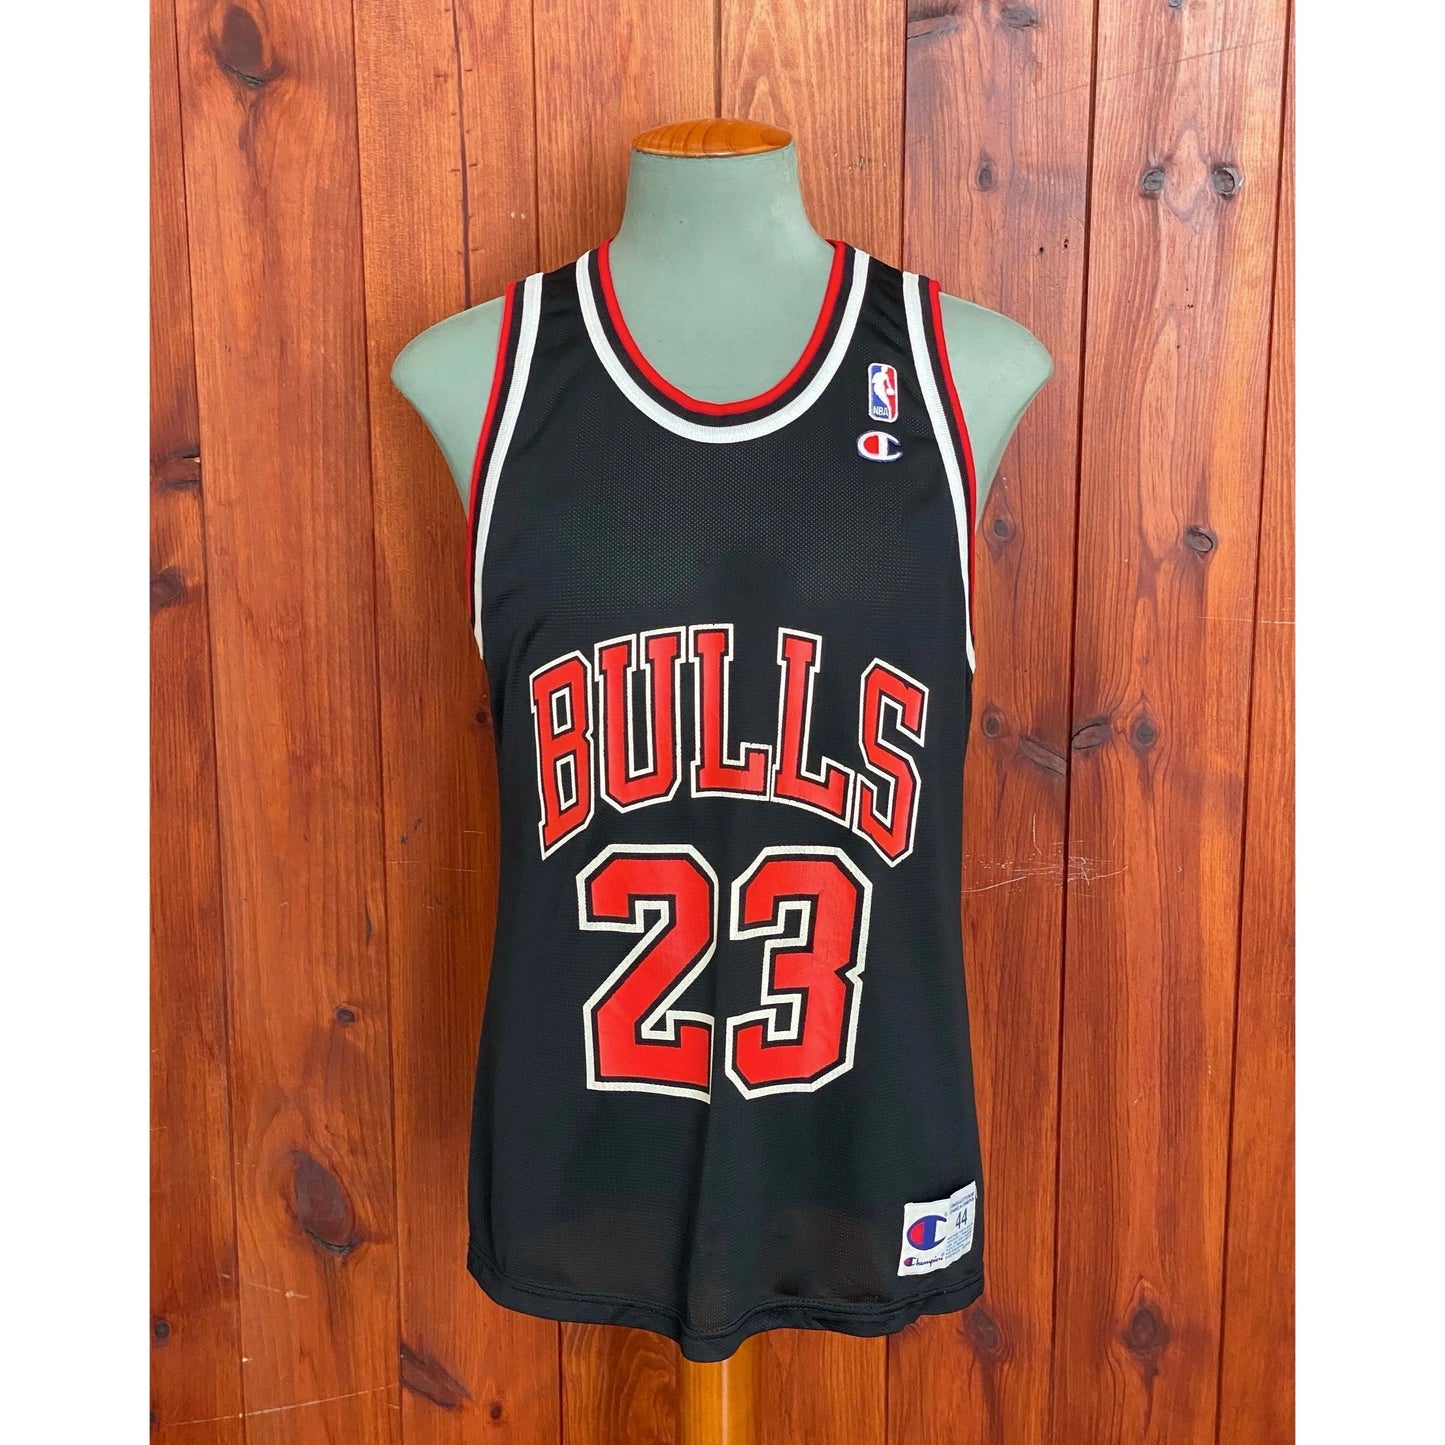 Vintage 90s NBA Chicago Bulls Michael Jordan #23 jersey, size 44 - front view. Made in USA by Champion.